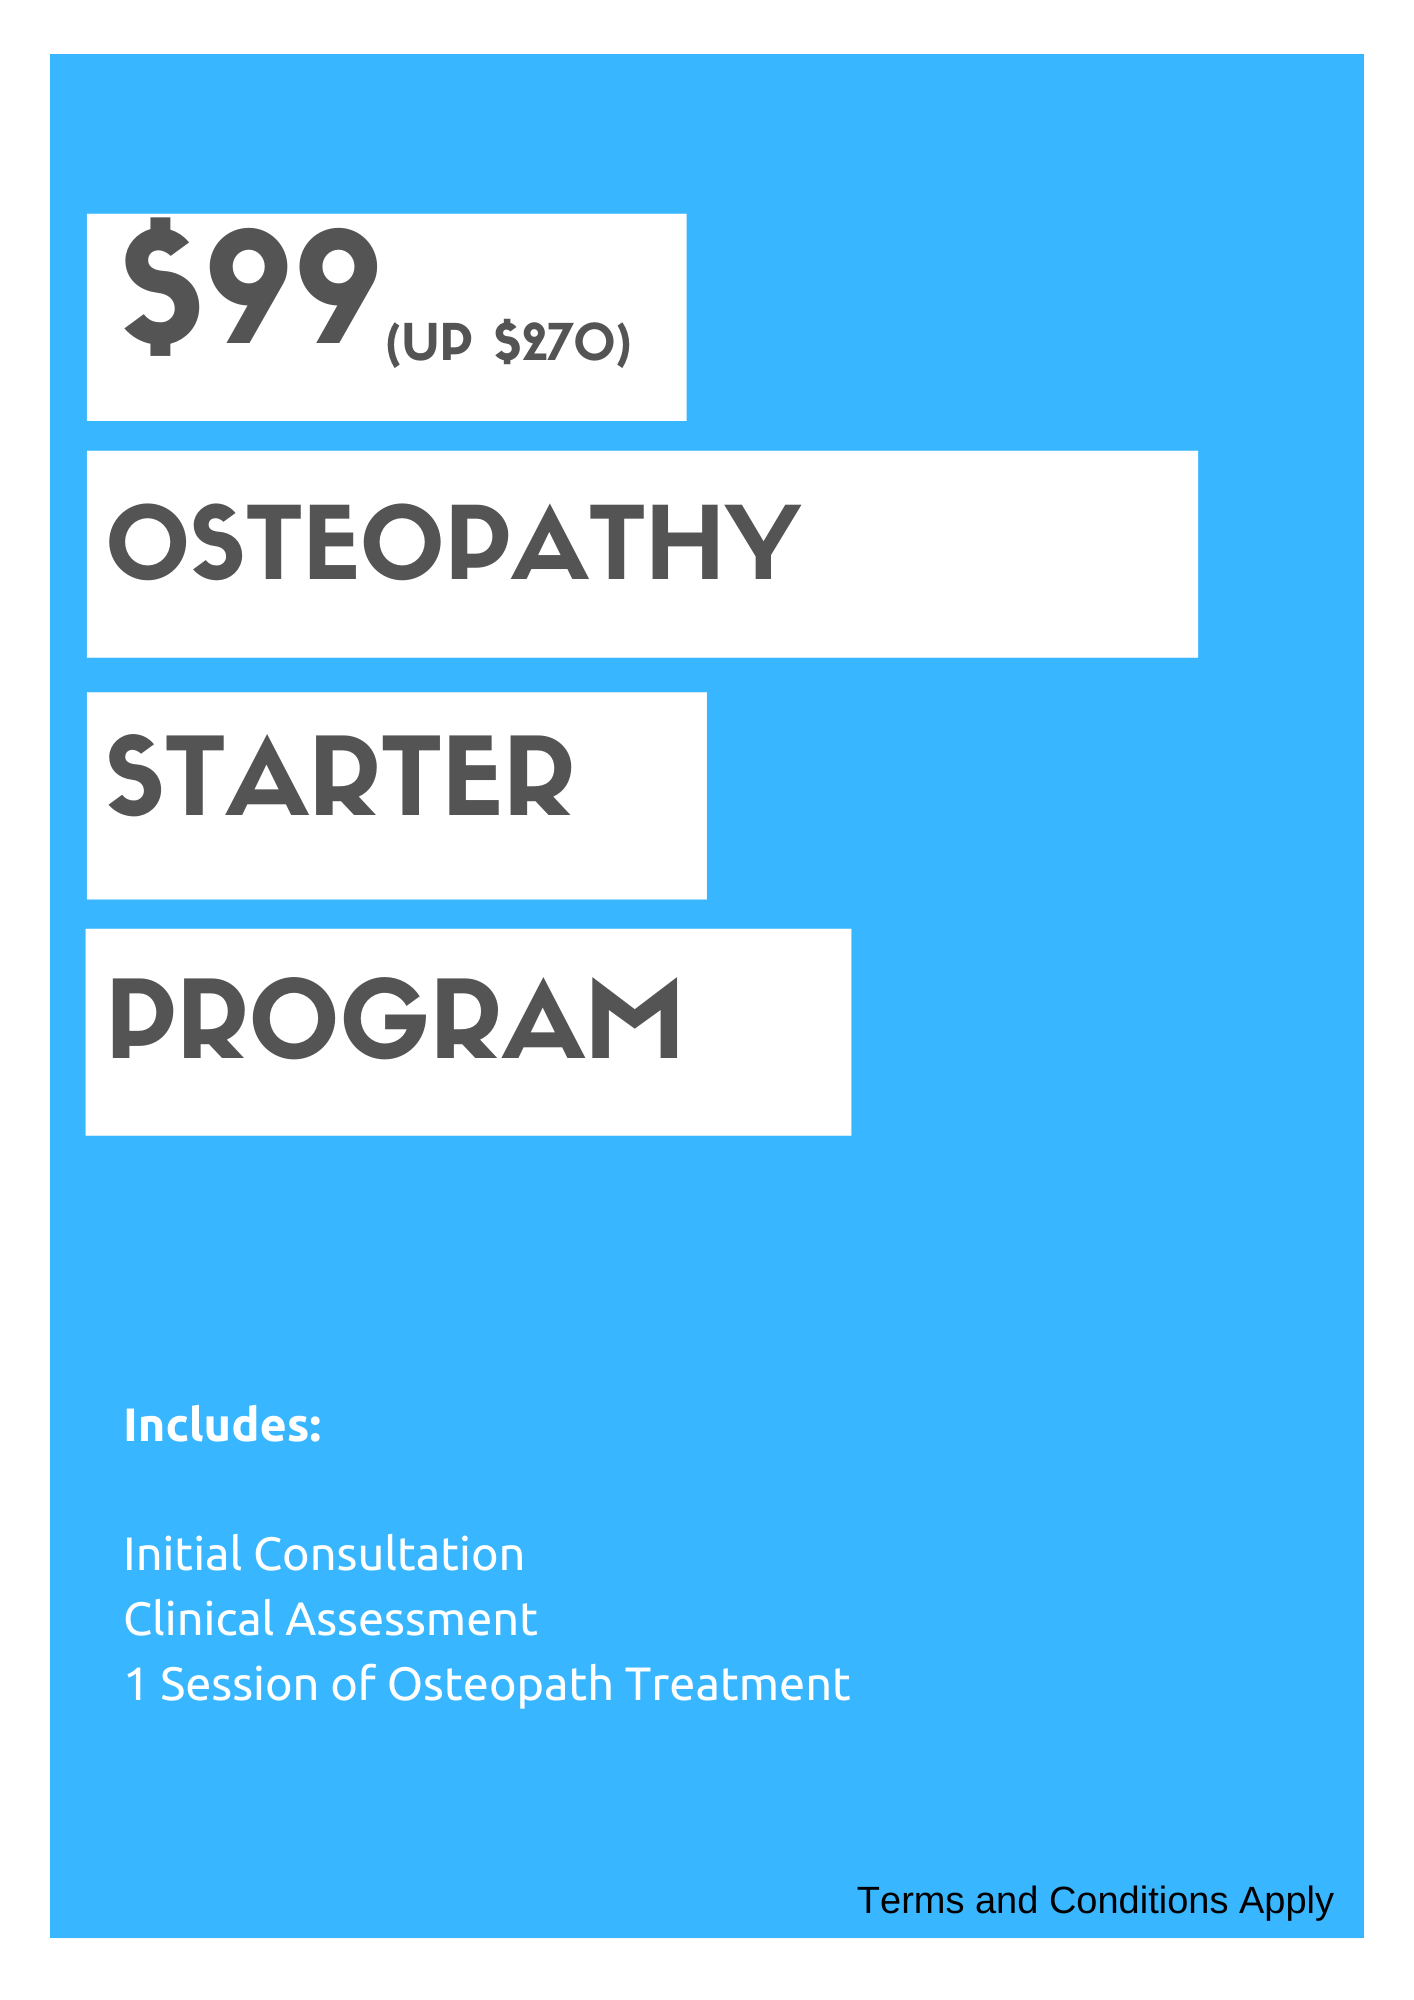 The Osteopath